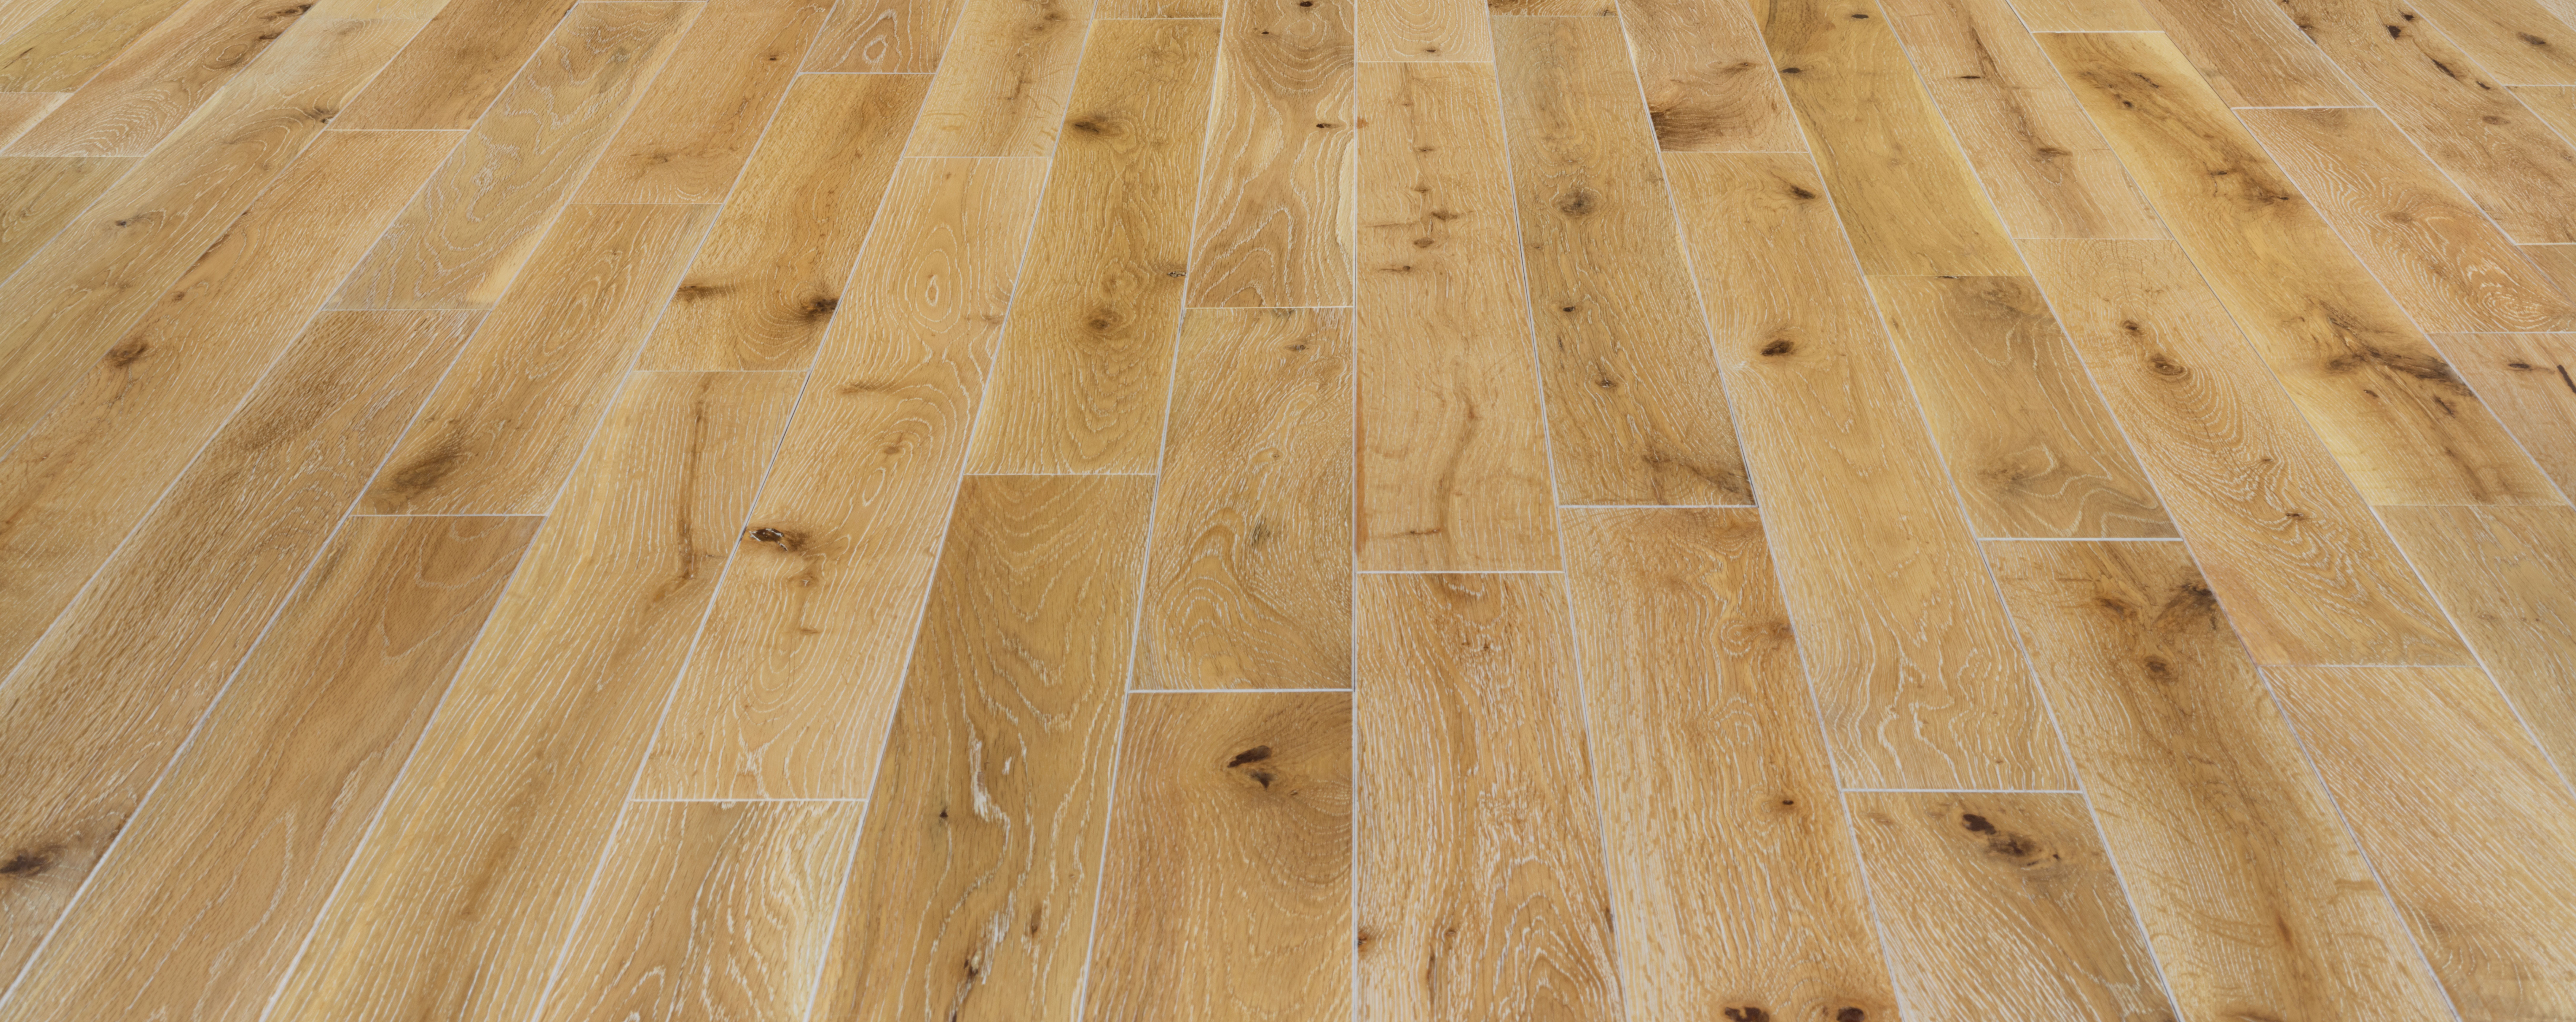 23 Great 3 8 solid Hardwood Flooring 2024 free download 3 8 solid hardwood flooring of harbor oak 3 1 2e280b3 white oak white washed etx surfaces with etx surfaces harbor oak white oak white washed wood flooring